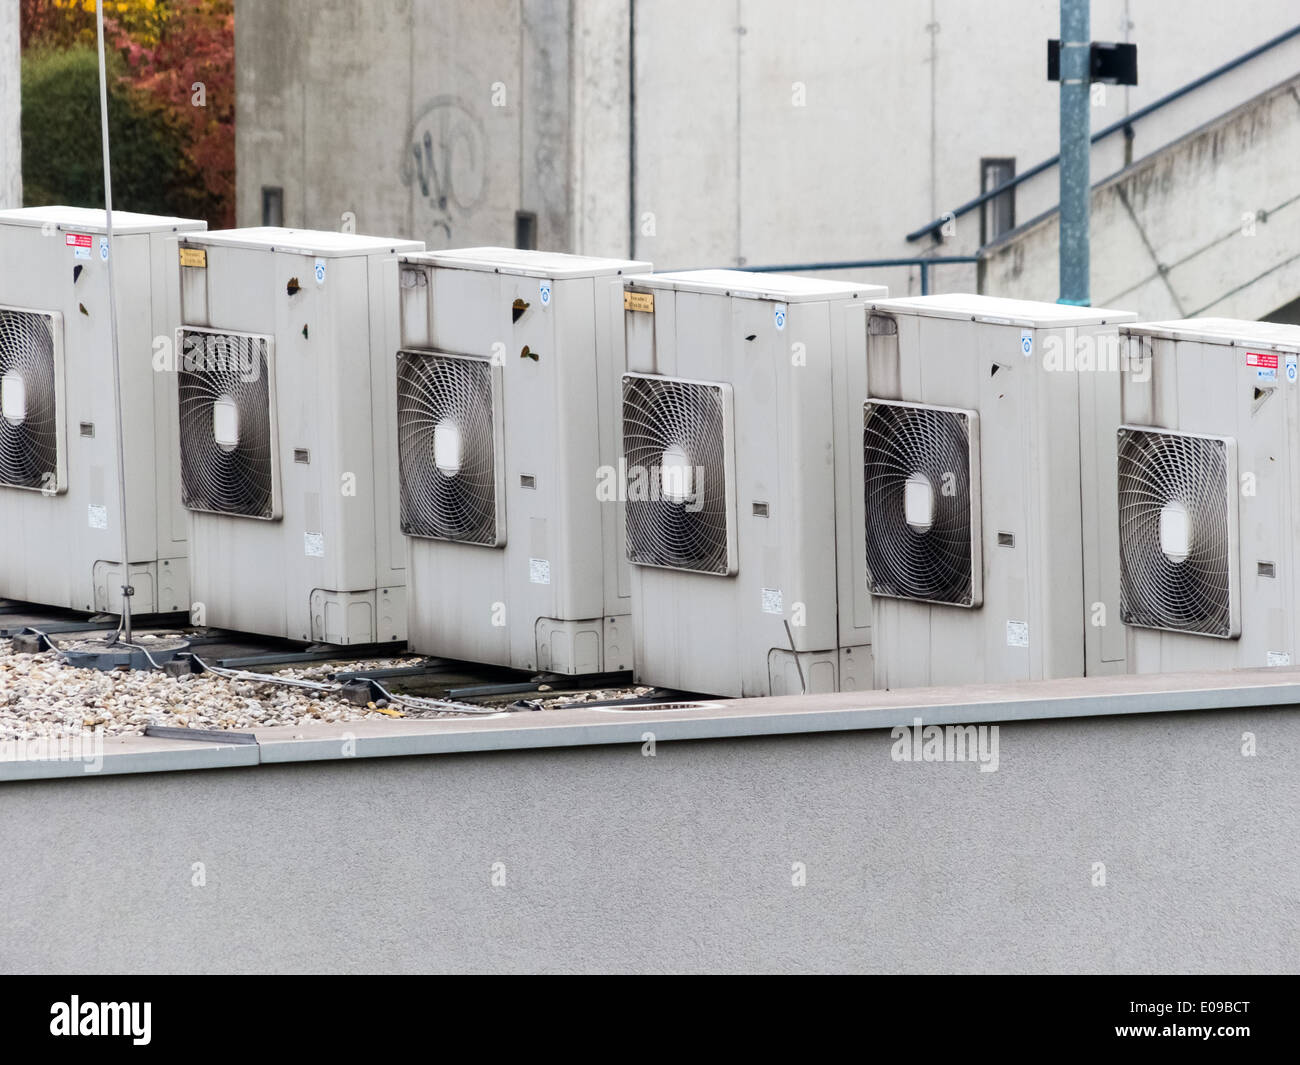 Several climate devices of an air-conditioning stand nebeneienander. Cooling by energy, Mehrere Klimageraete einer Klimaanlage s Stock Photo